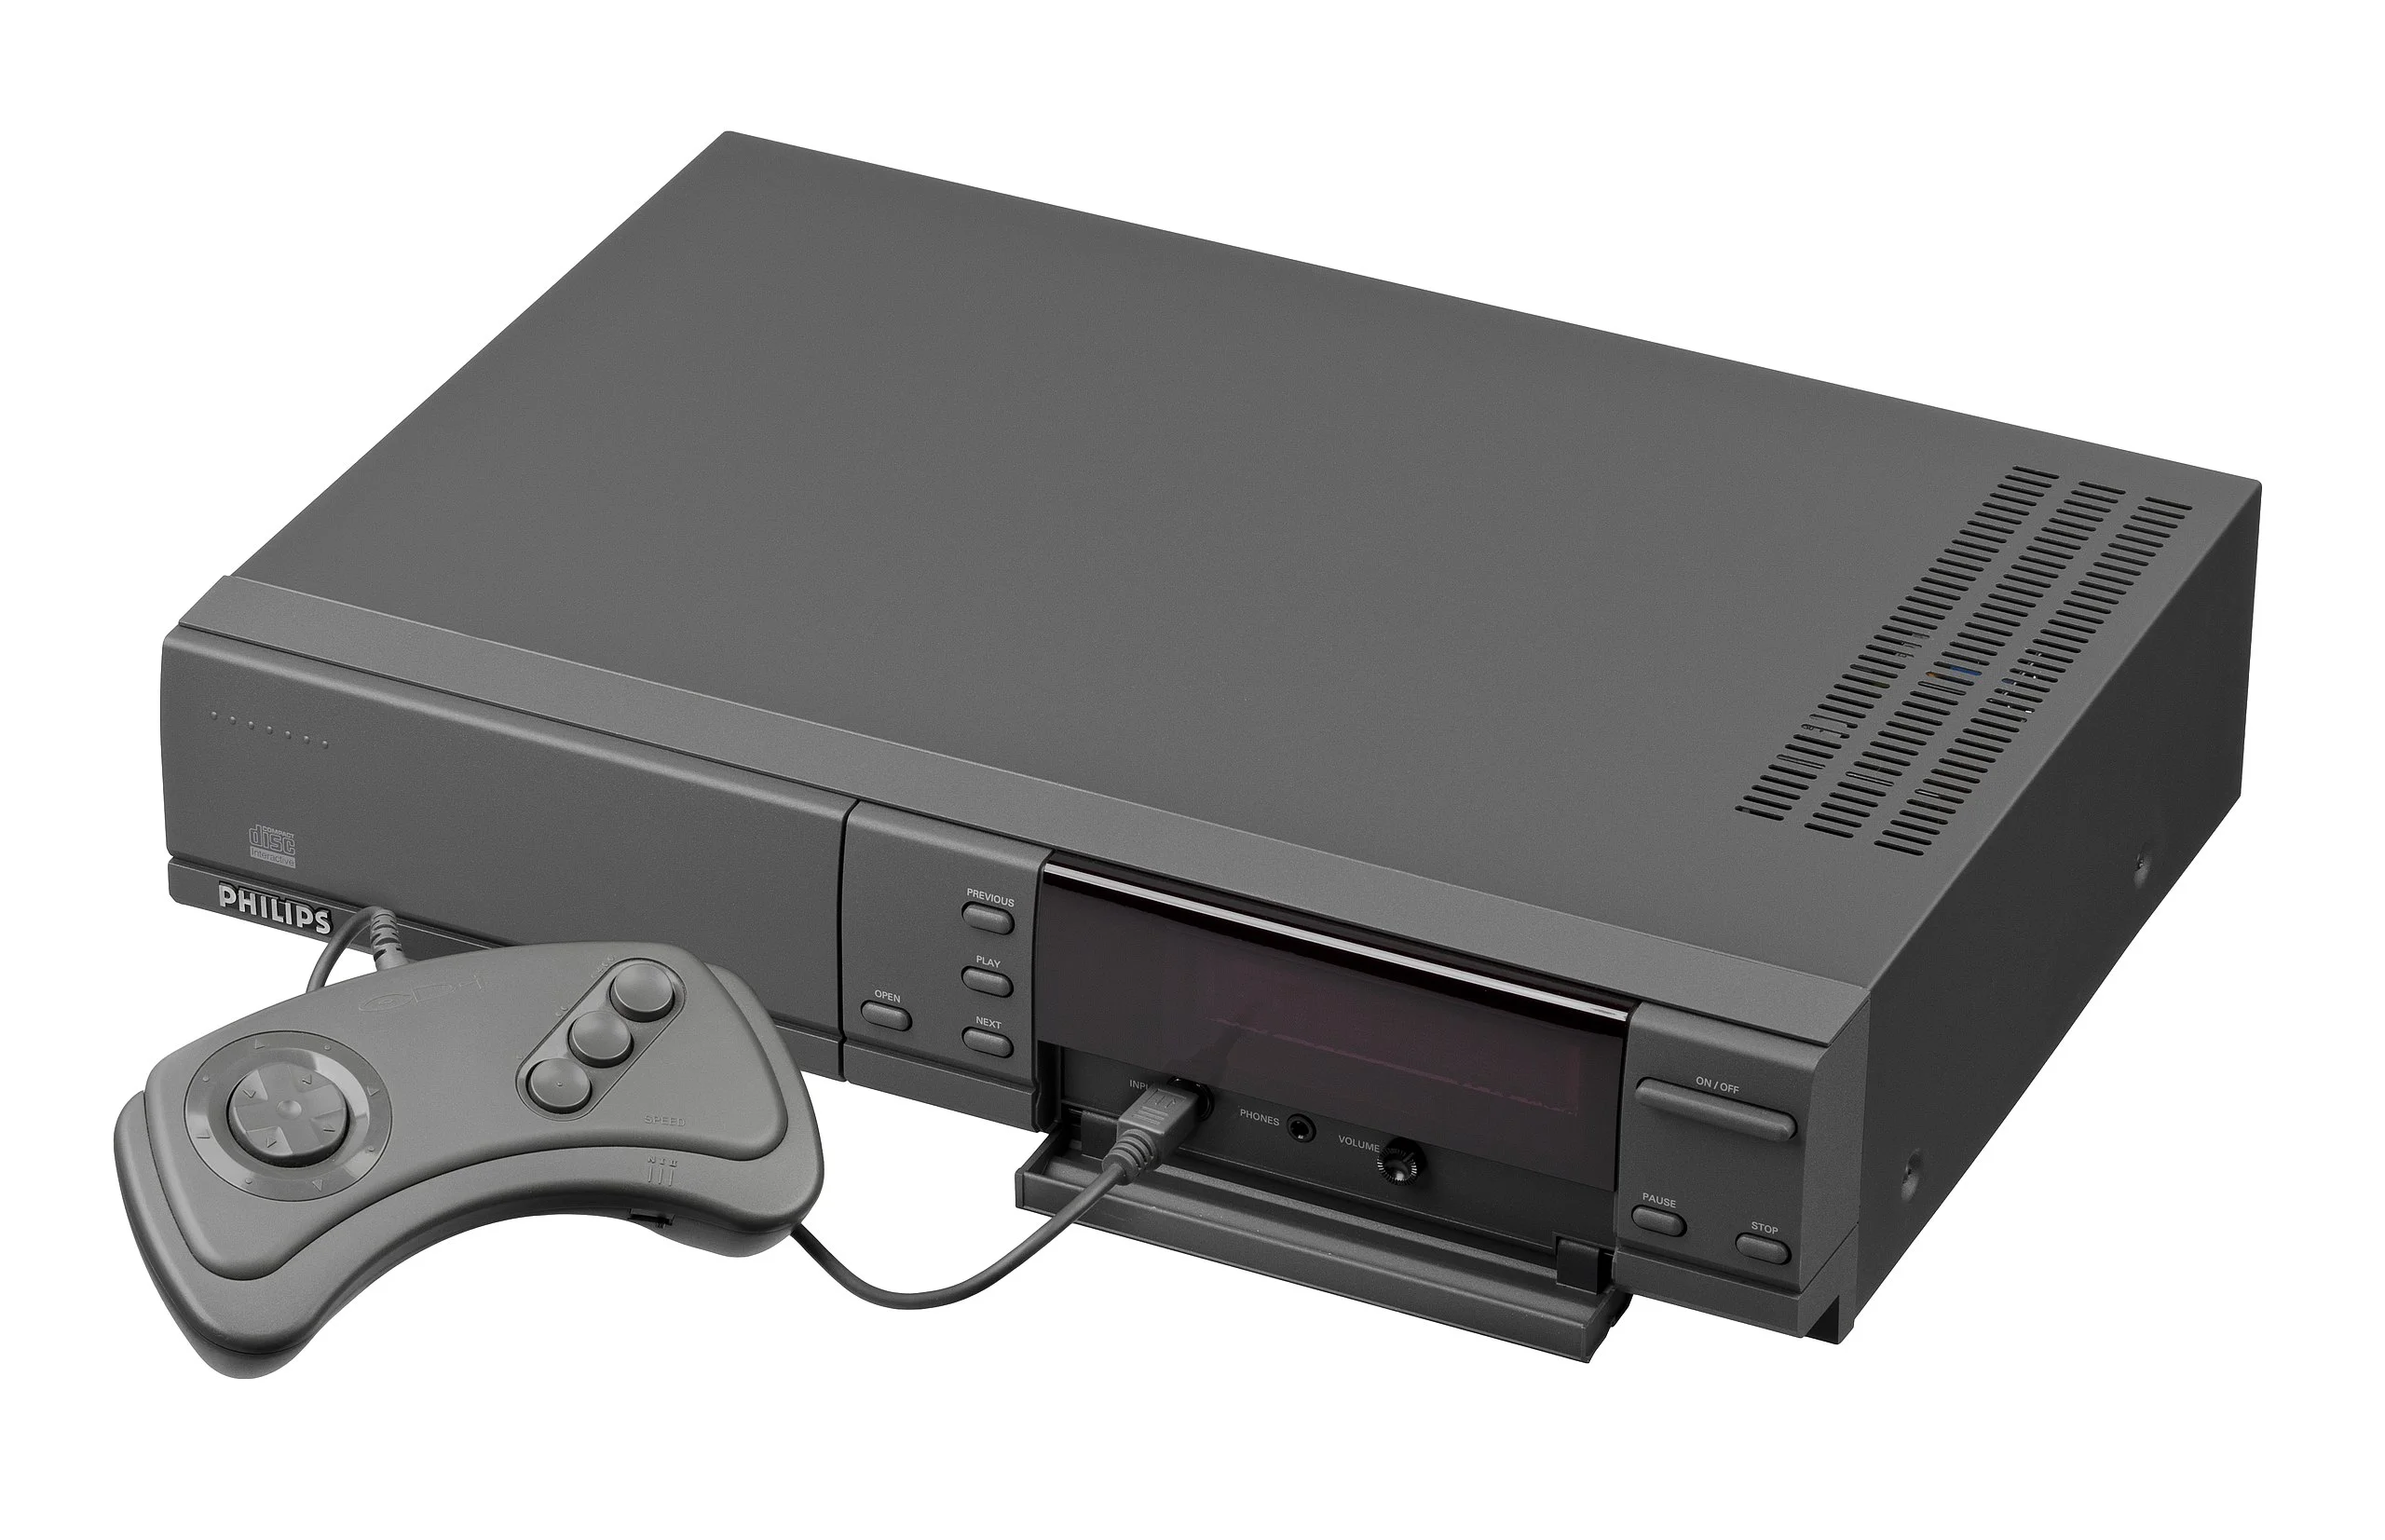  Philips CD-i 220 Console